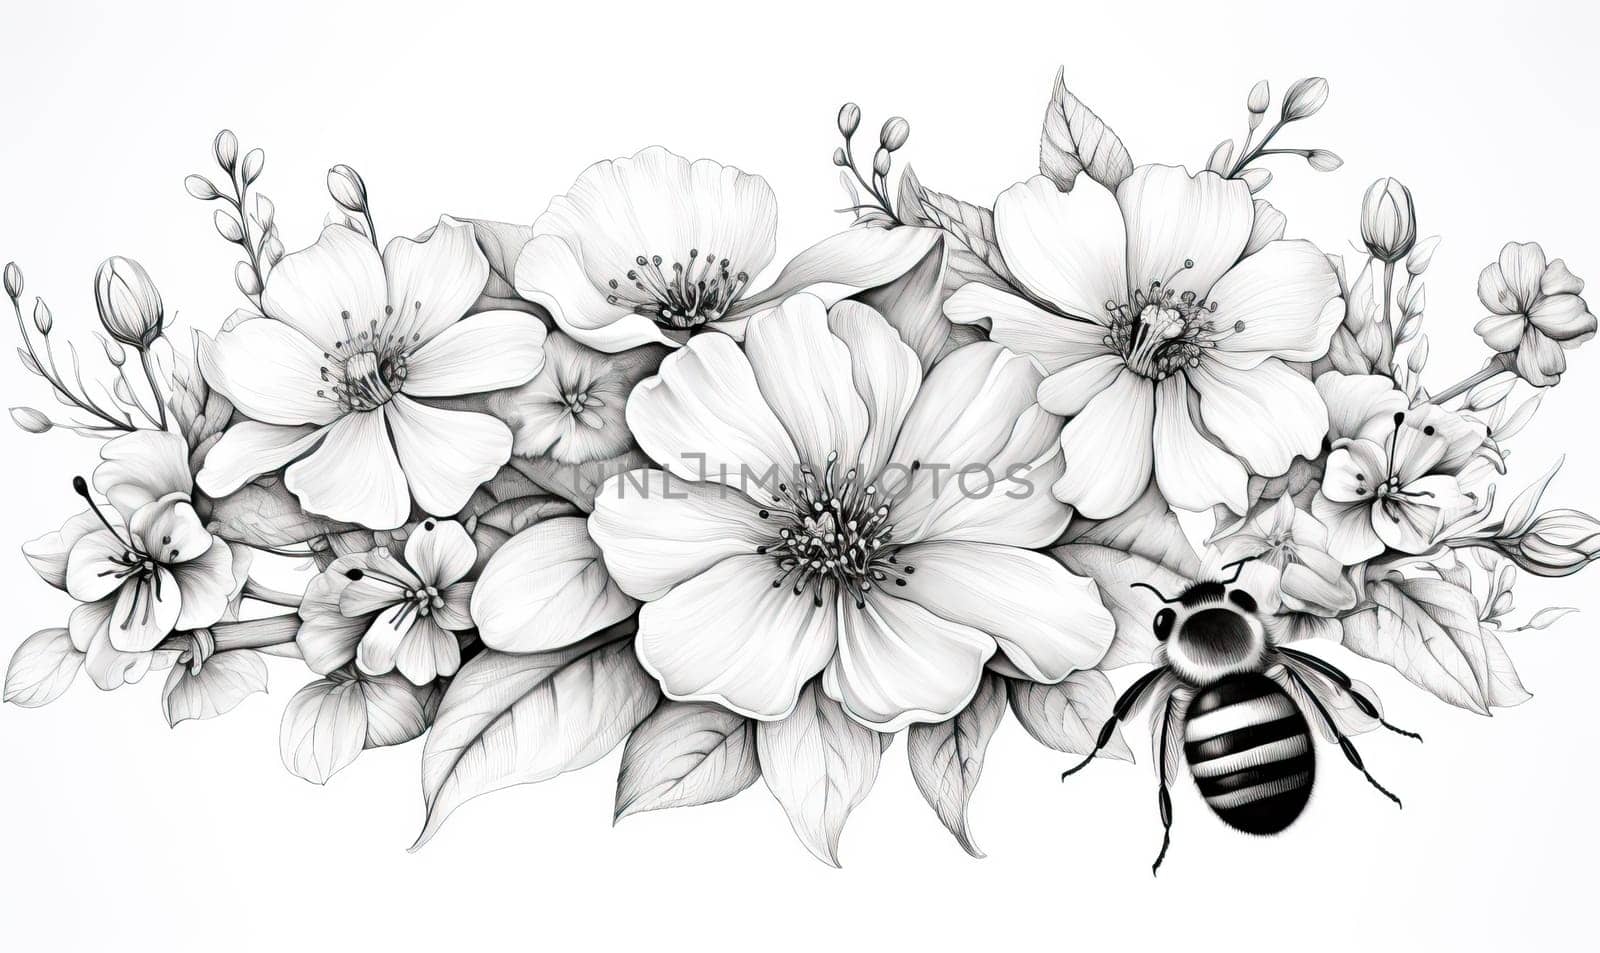 Black and white image of a bee on flowers. Selective soft focus.